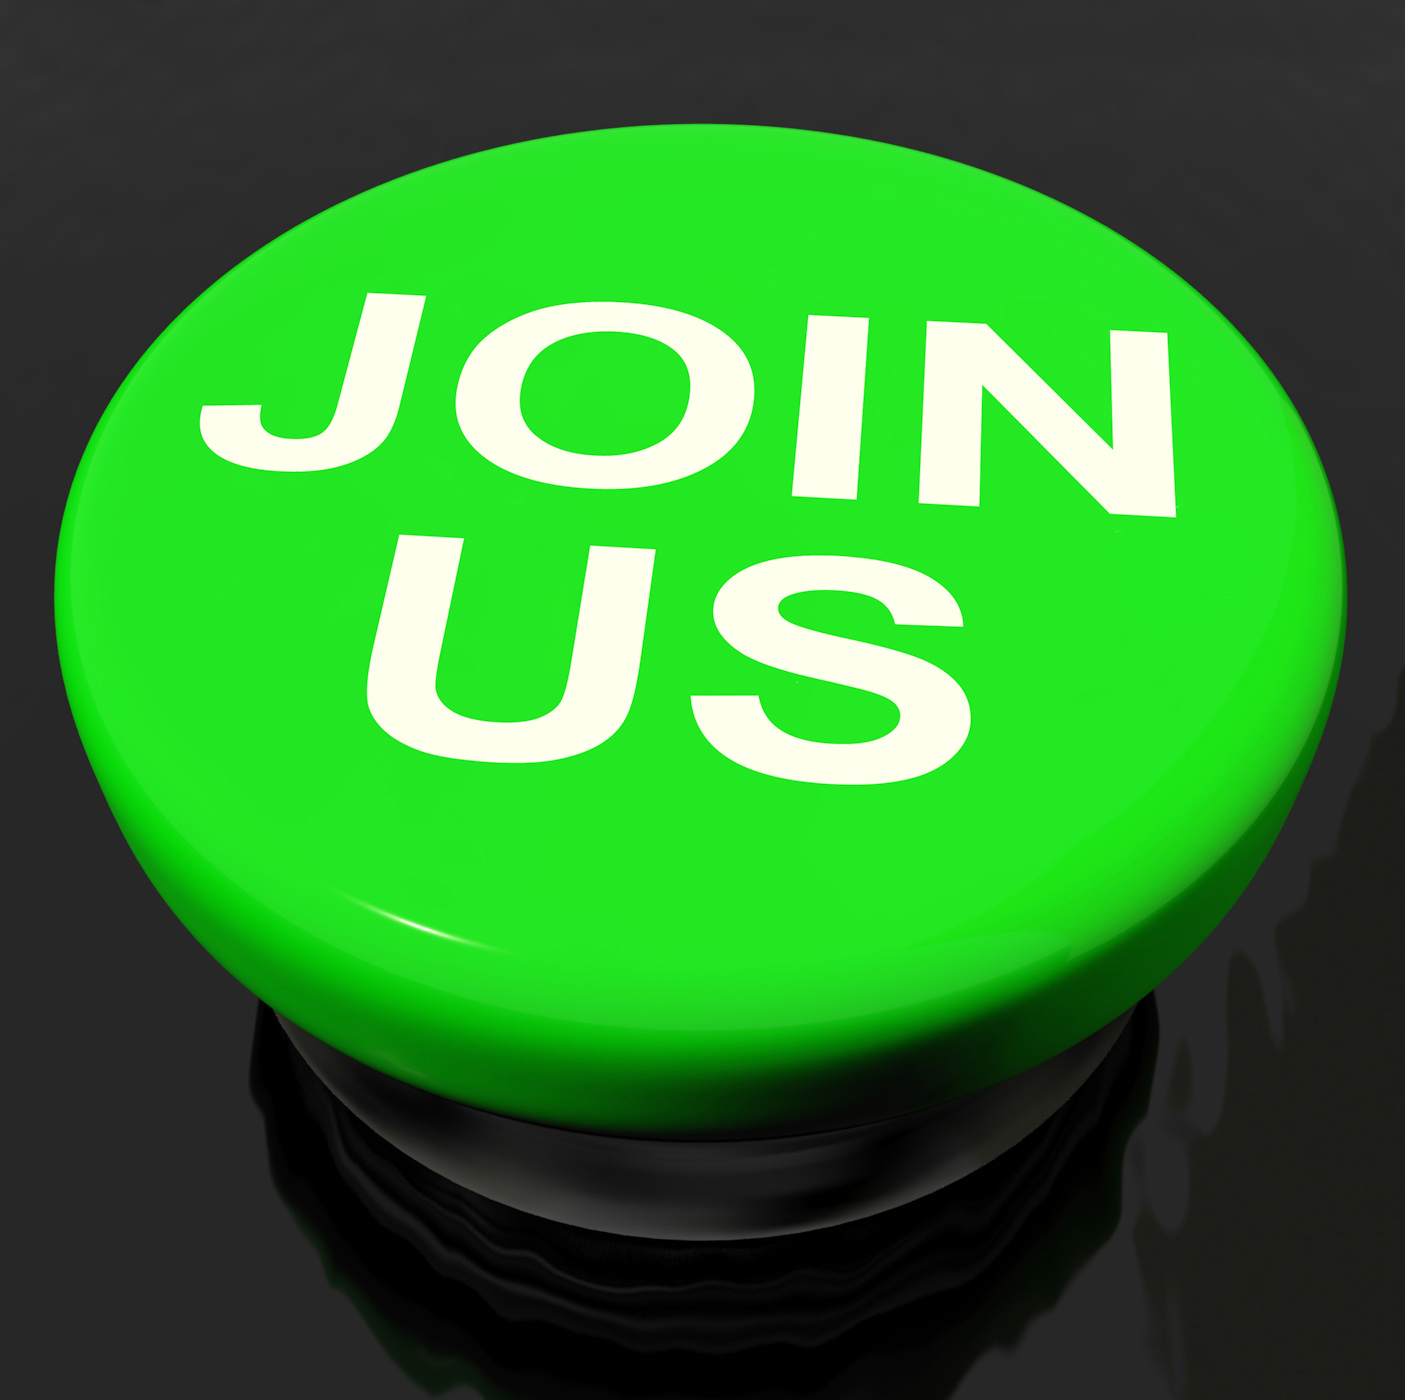 Join us button shows joining membership register photo